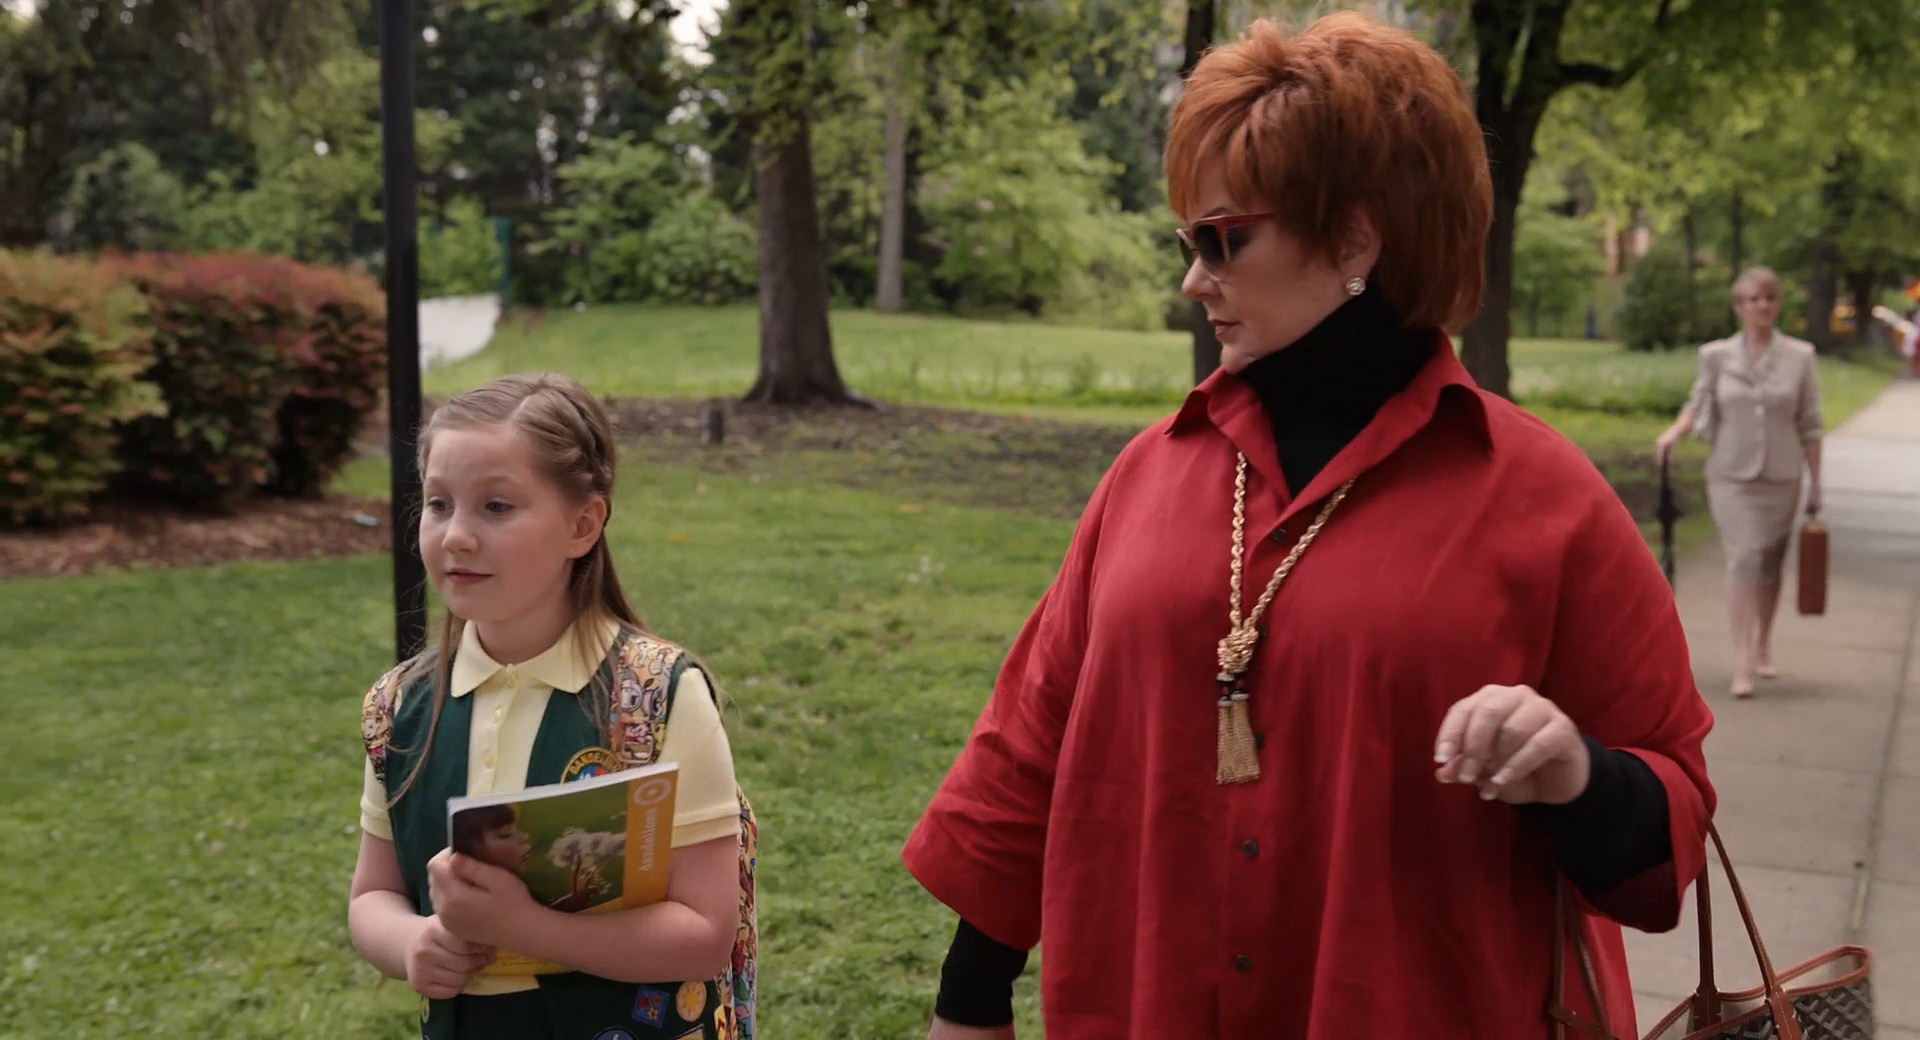 Vivian Falcone walking with Melissa McCarthy from her movie The Boss 